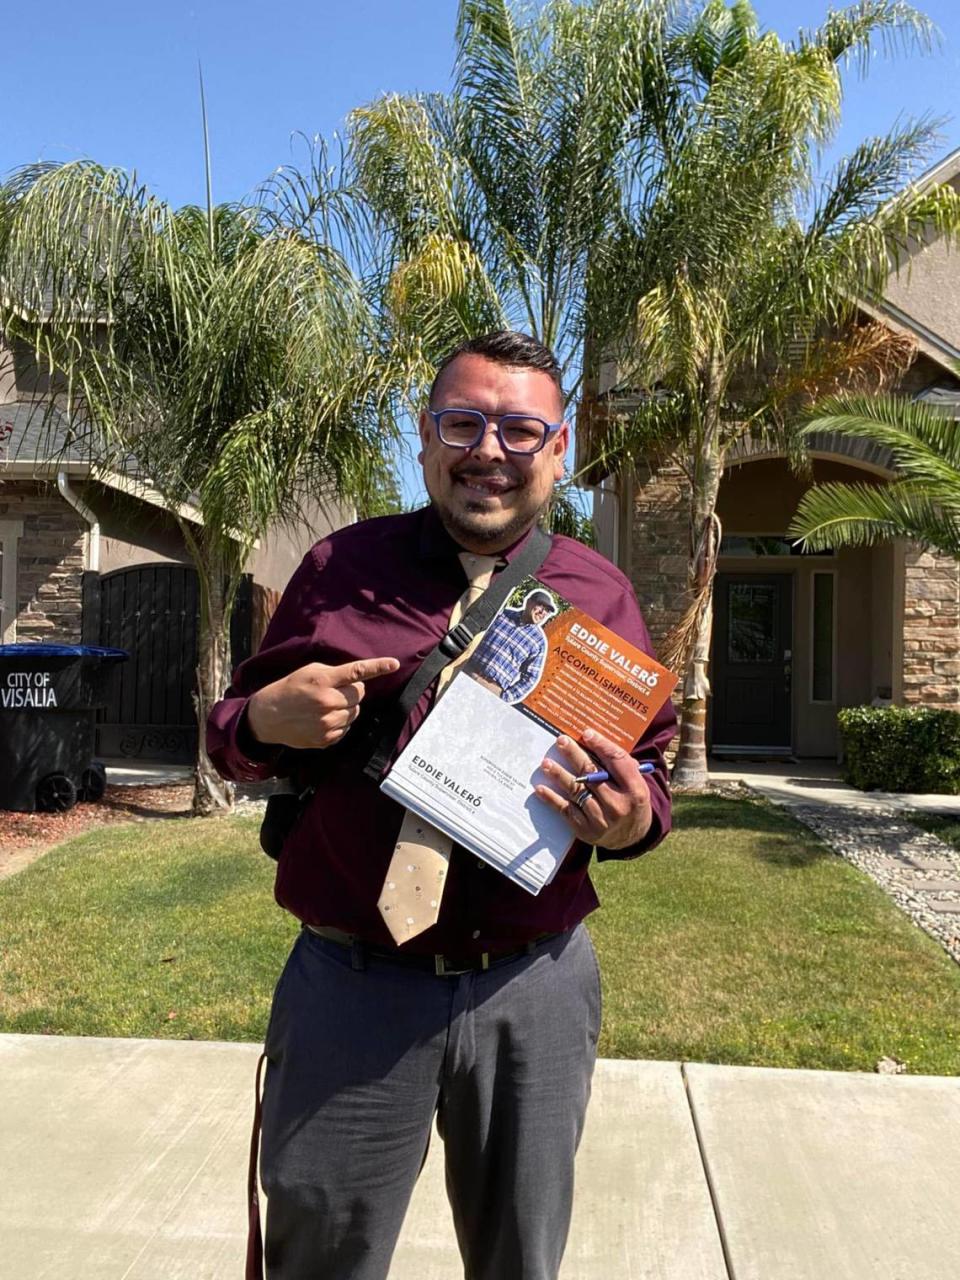 In-between meetings, Tulare County Supervisor Eddie Valero uses his breaks to walk and do some canvassing in the neighborhood